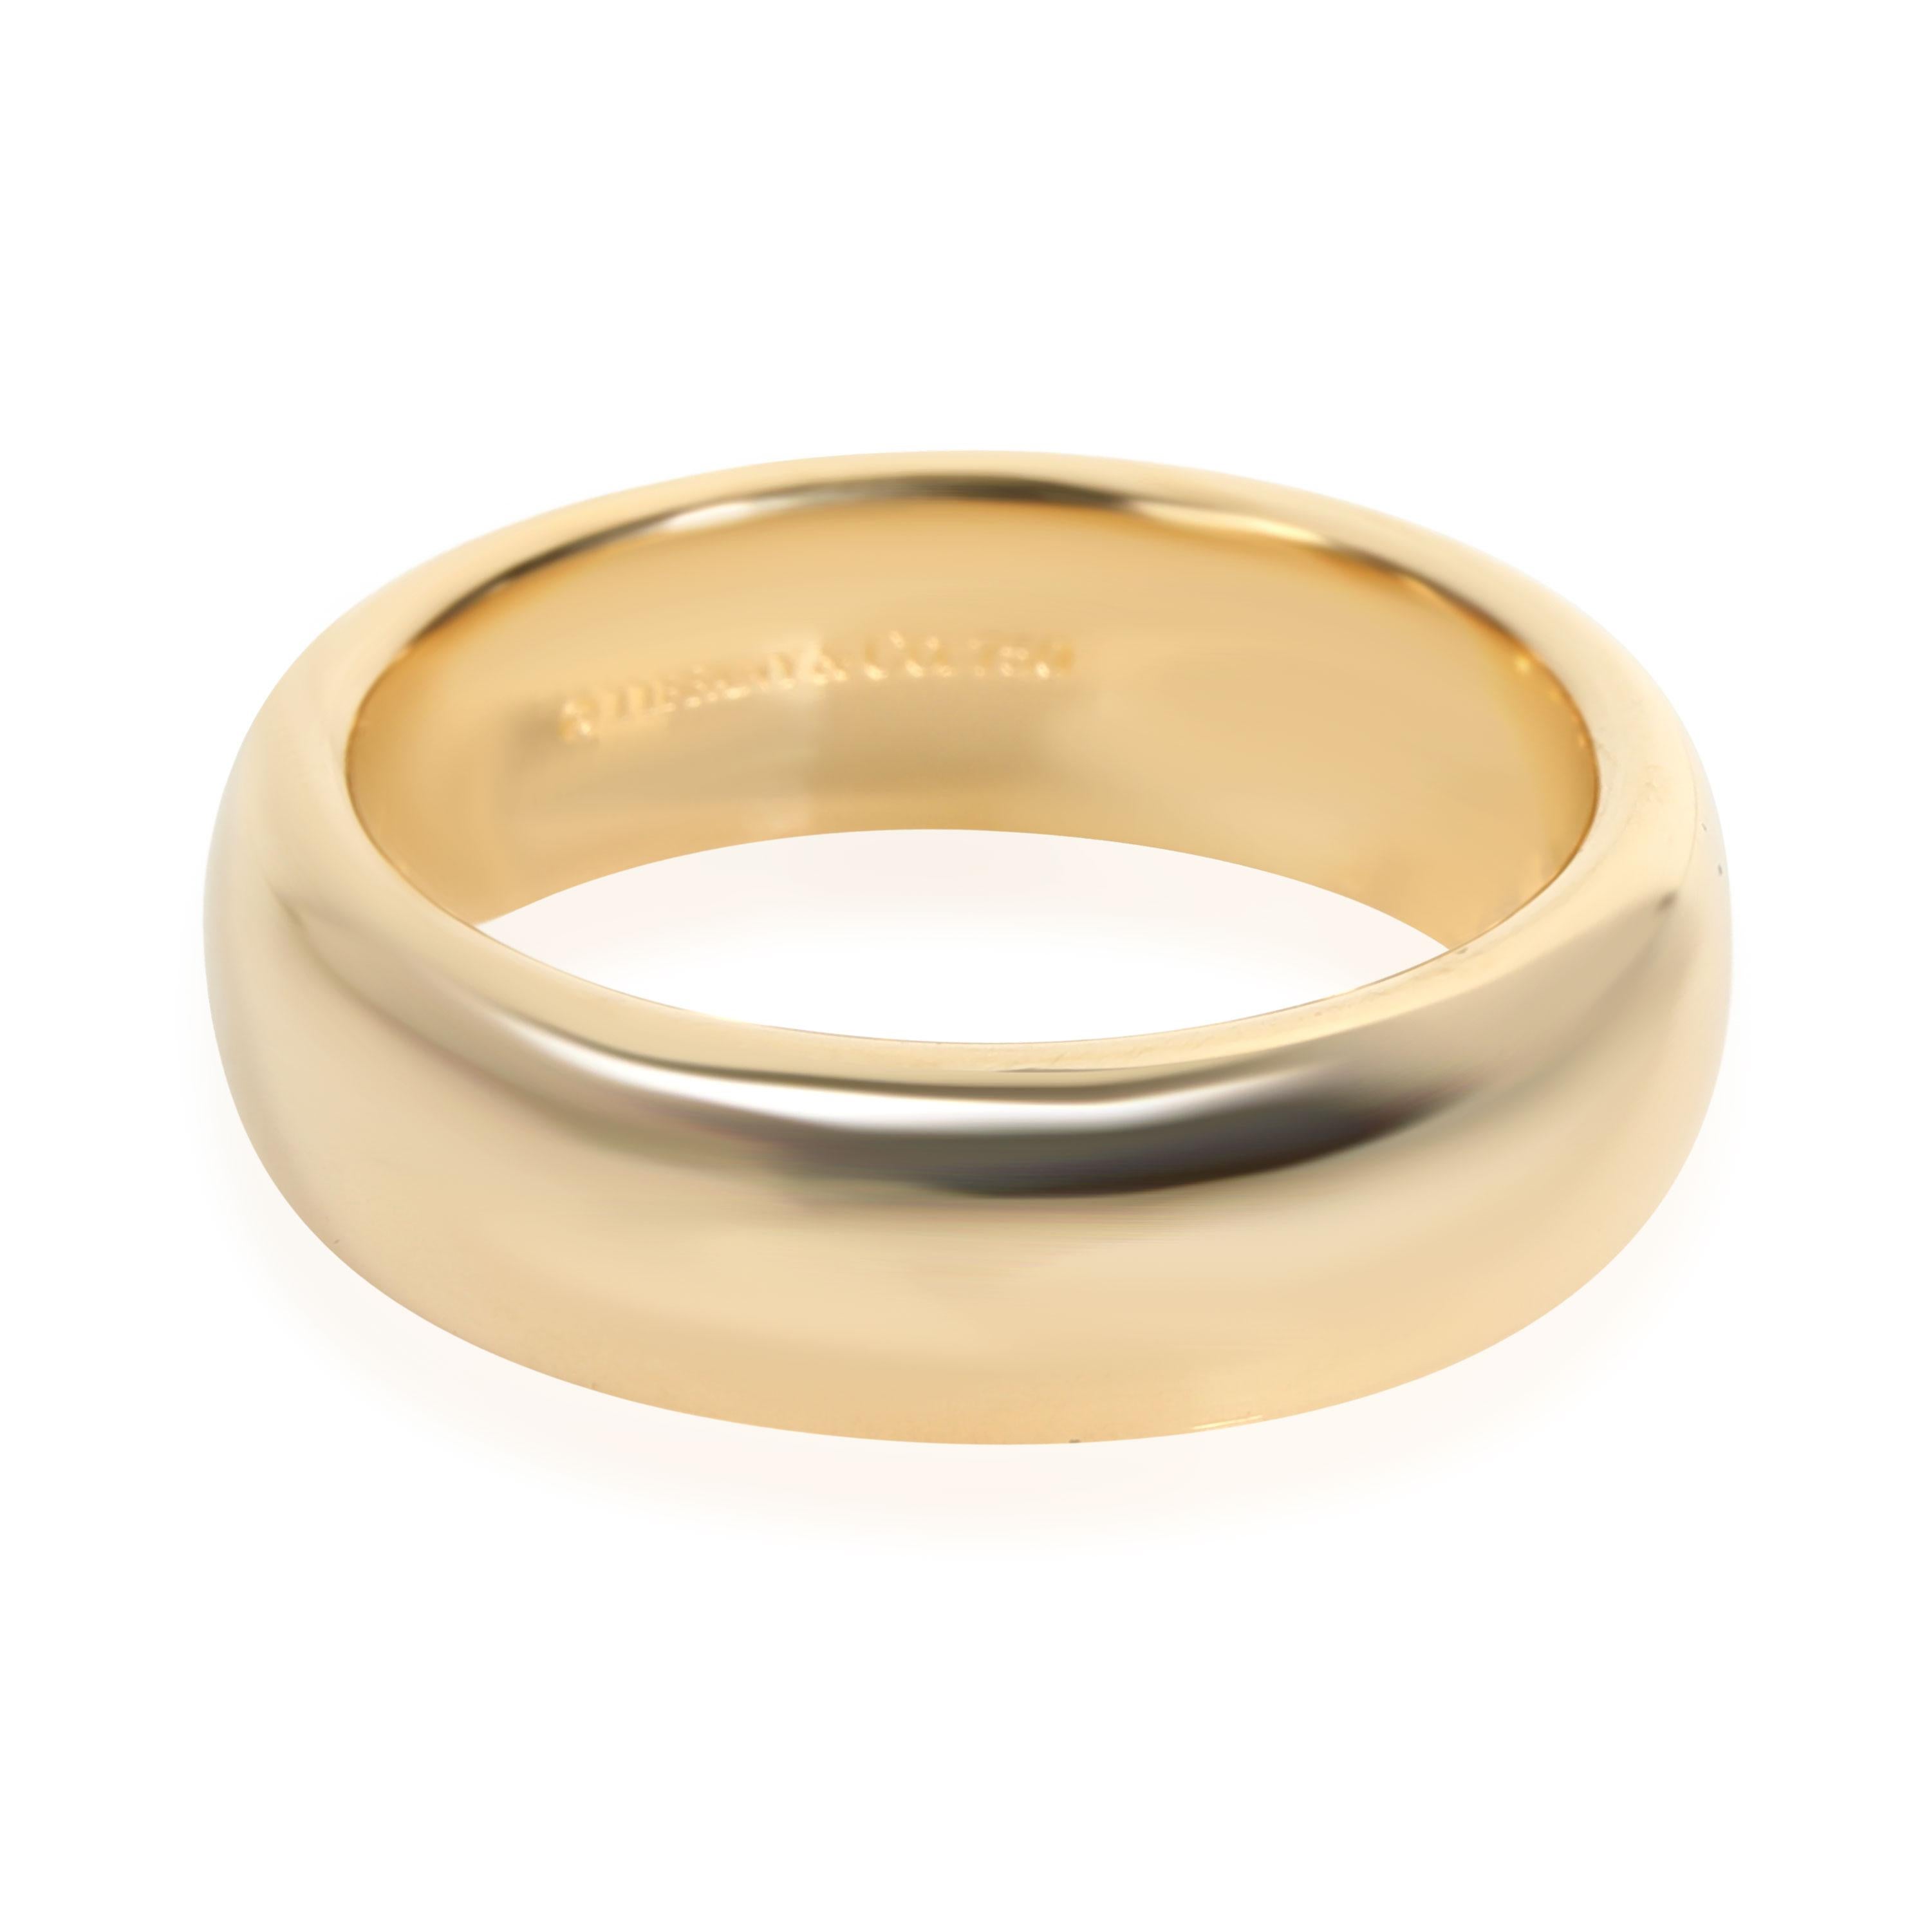 Women's or Men's Tiffany & Co. Classic Wedding Band in 18K Yellow Gold